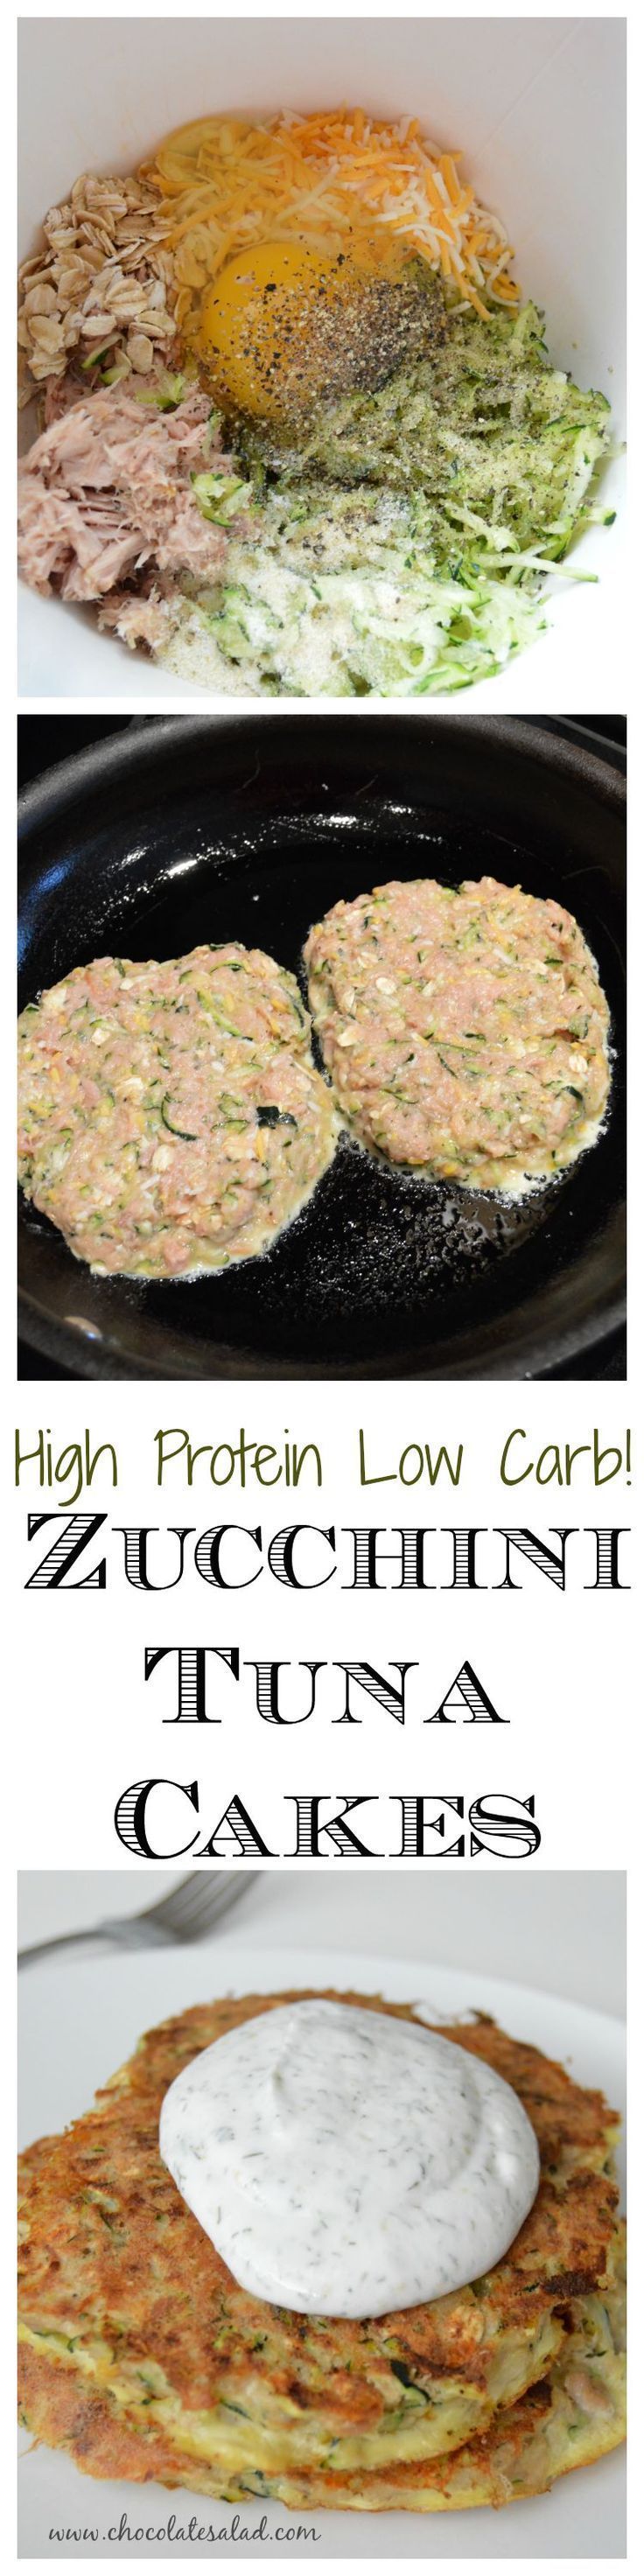 Low Carb Zucchini Tuna Cakes. Only 280 calories and 34 g protein! Very low in carbs, but high in protein – 34g! This keto recipe